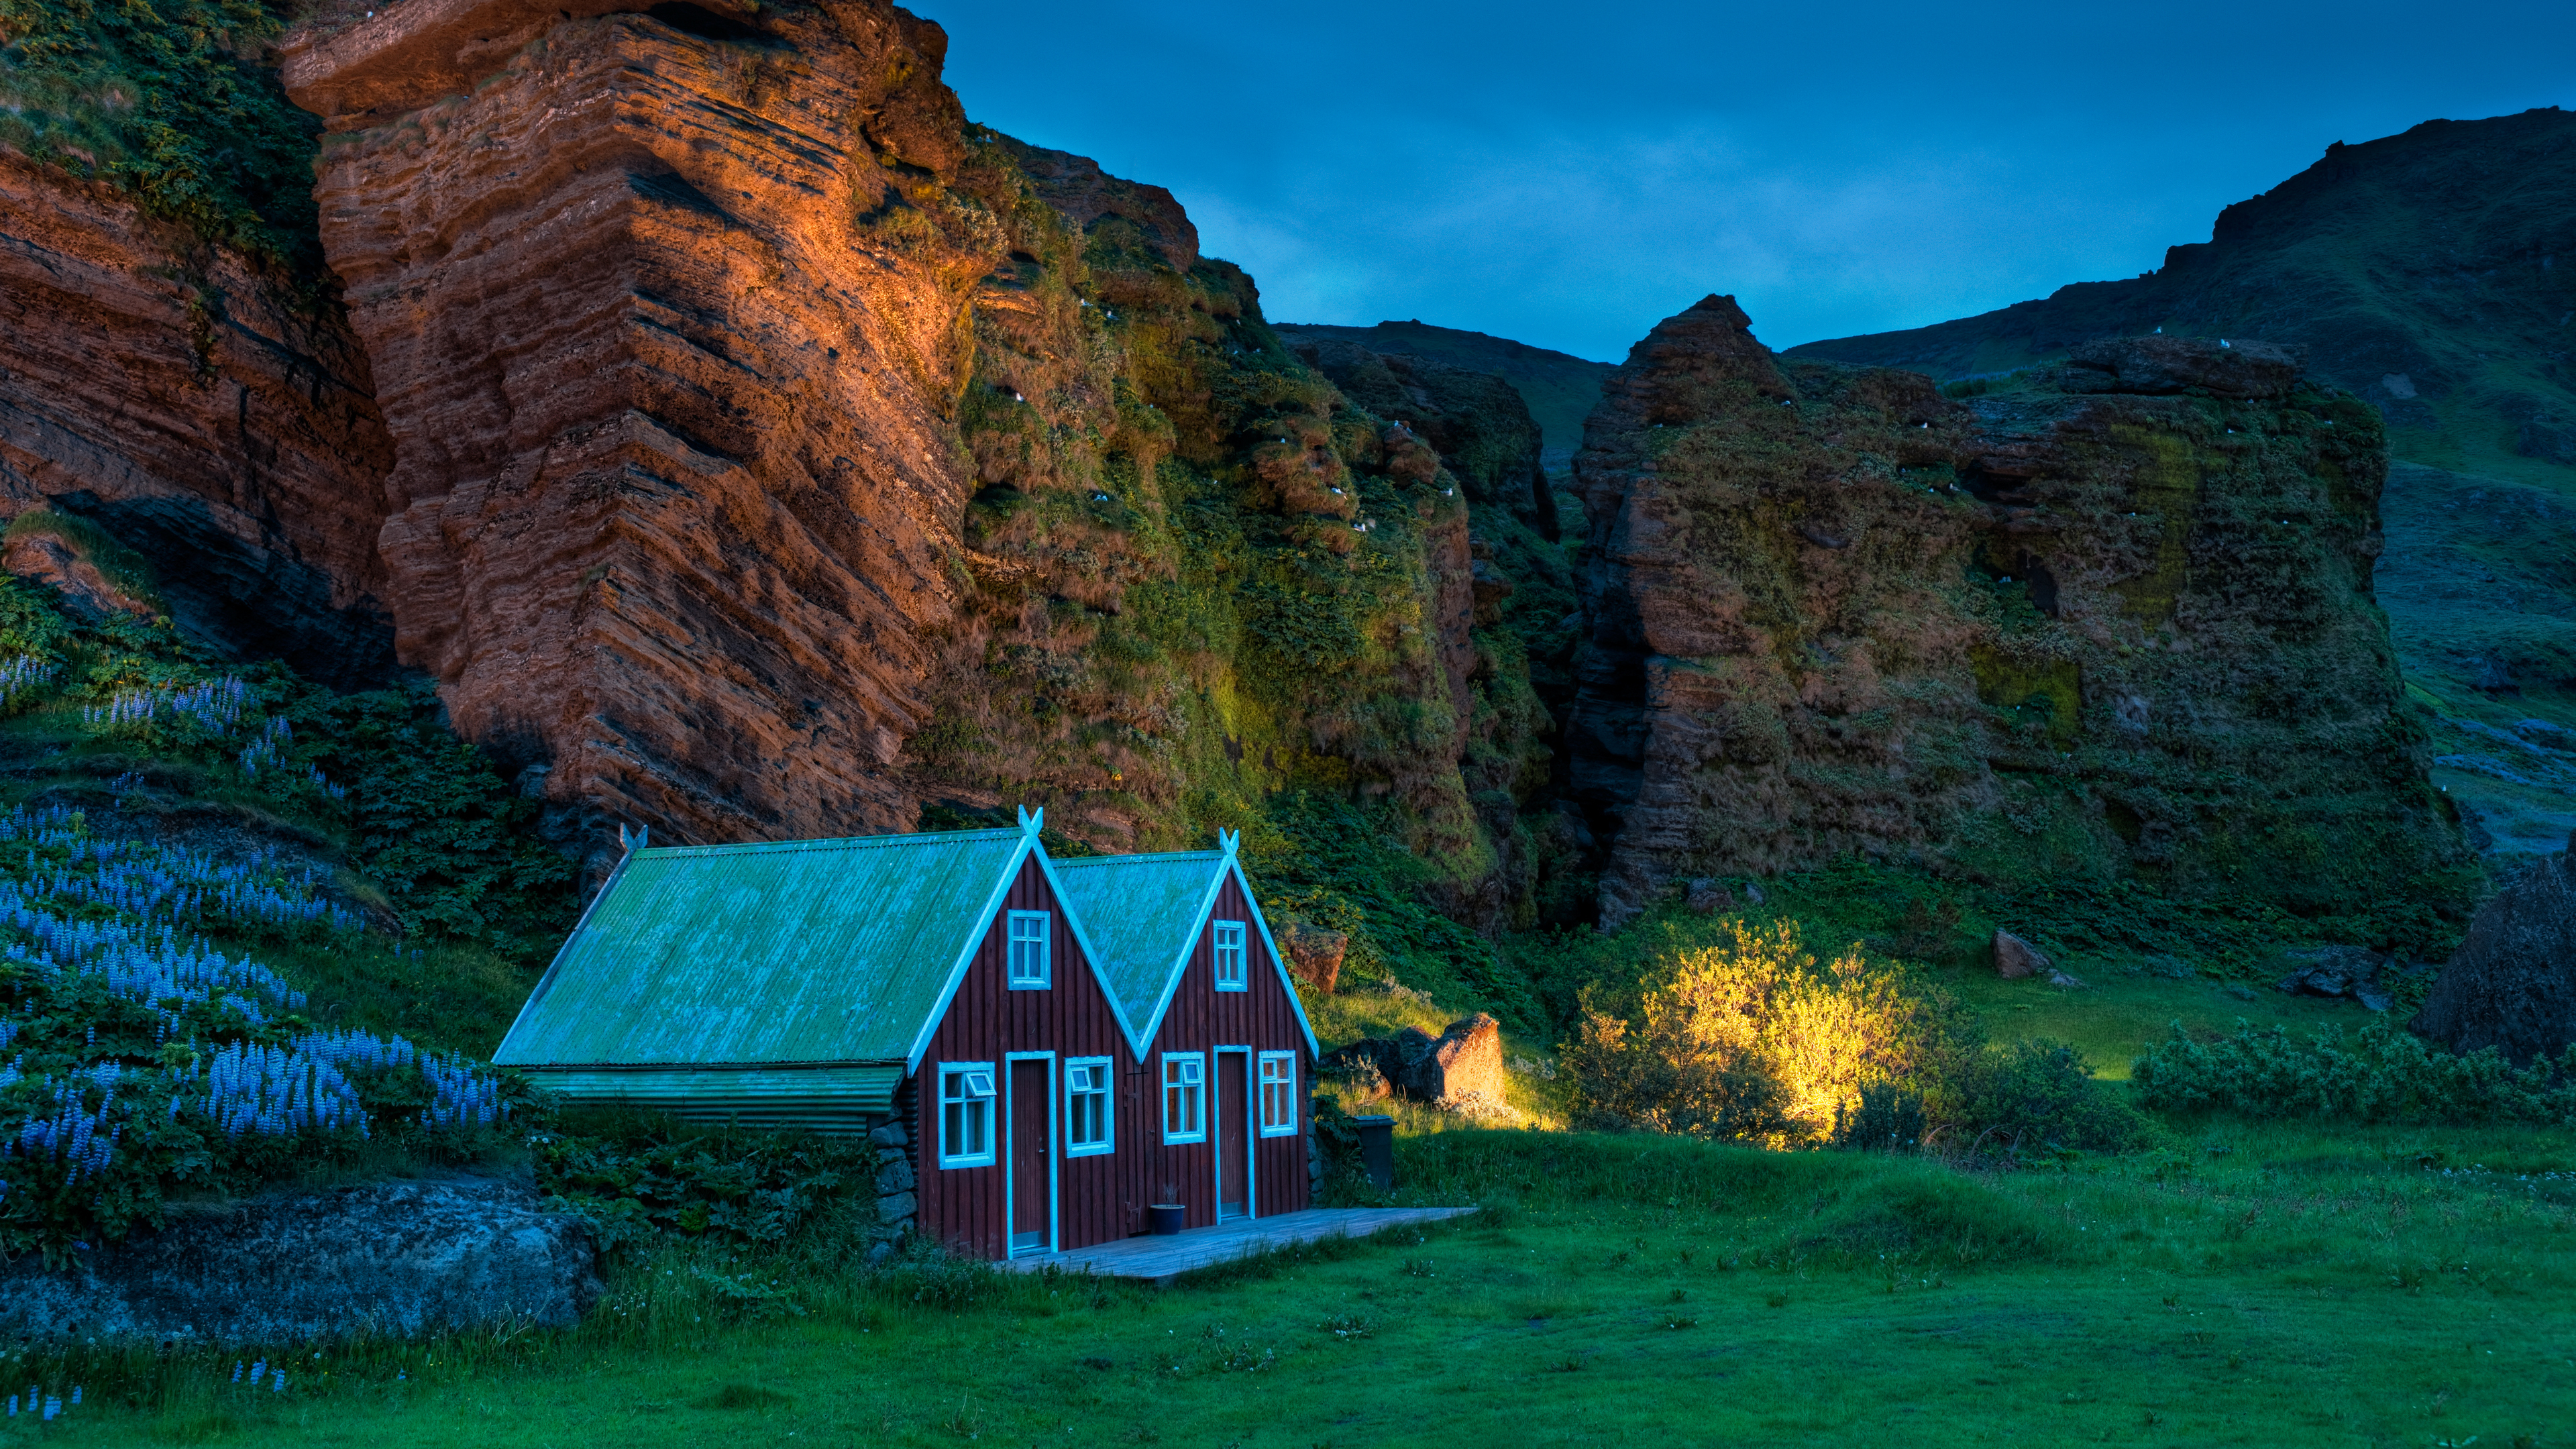 General 3840x2160 landscape Iceland Trey Ratcliff photography nature mountains rocks house grass flowers trees